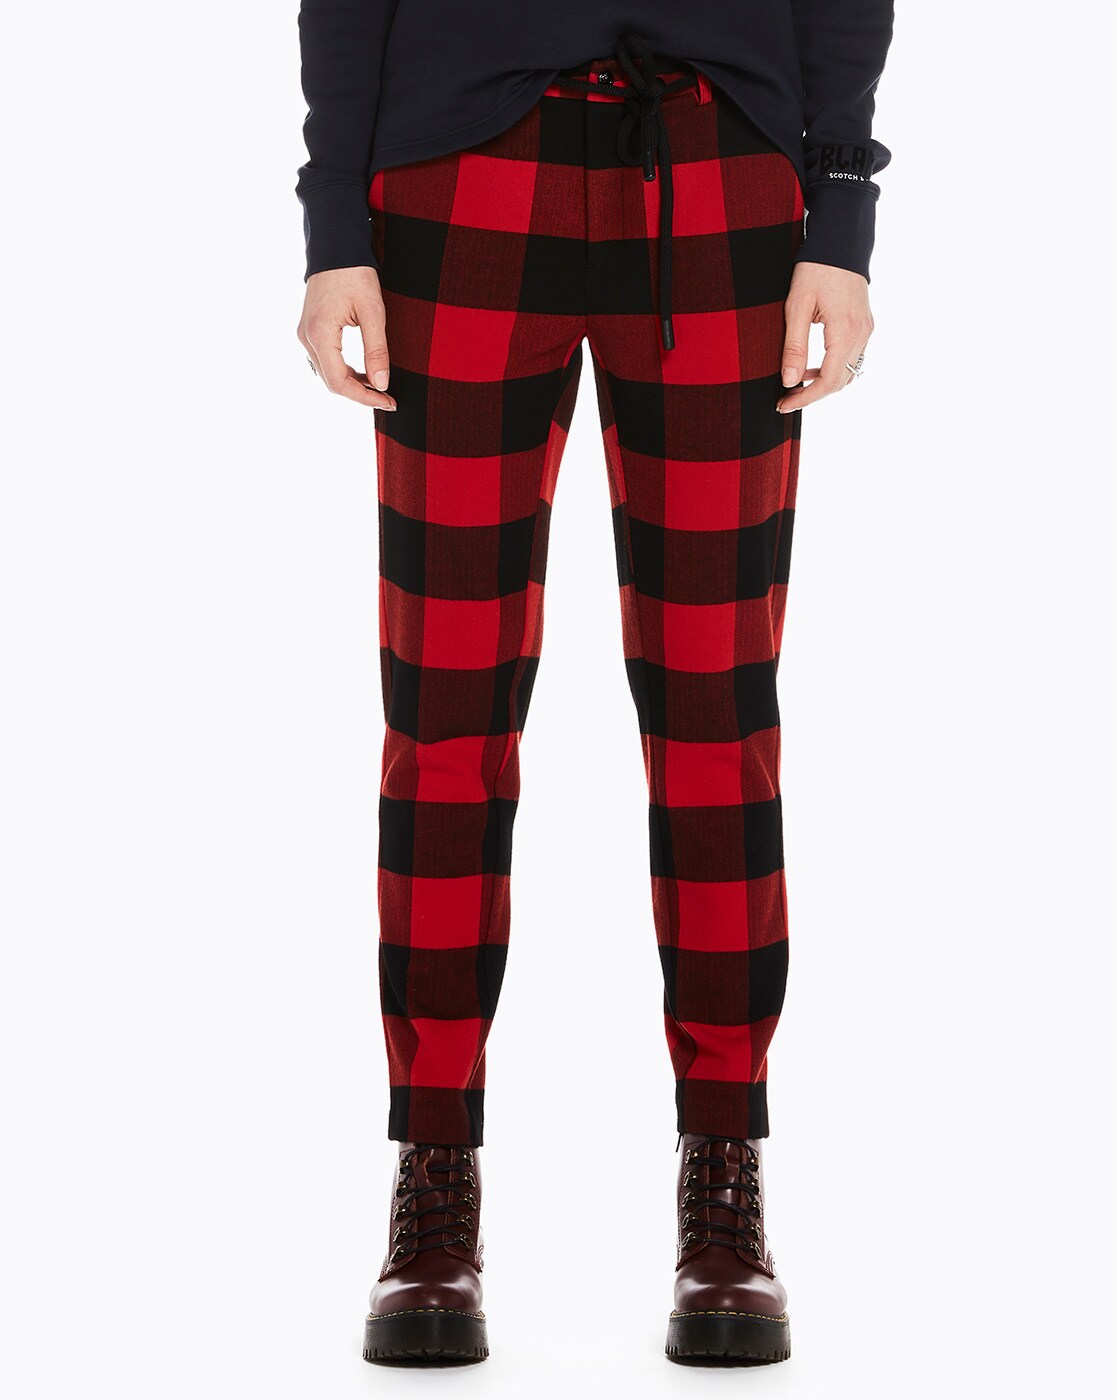 BBG Black Red Riding Pant  Buy online in India